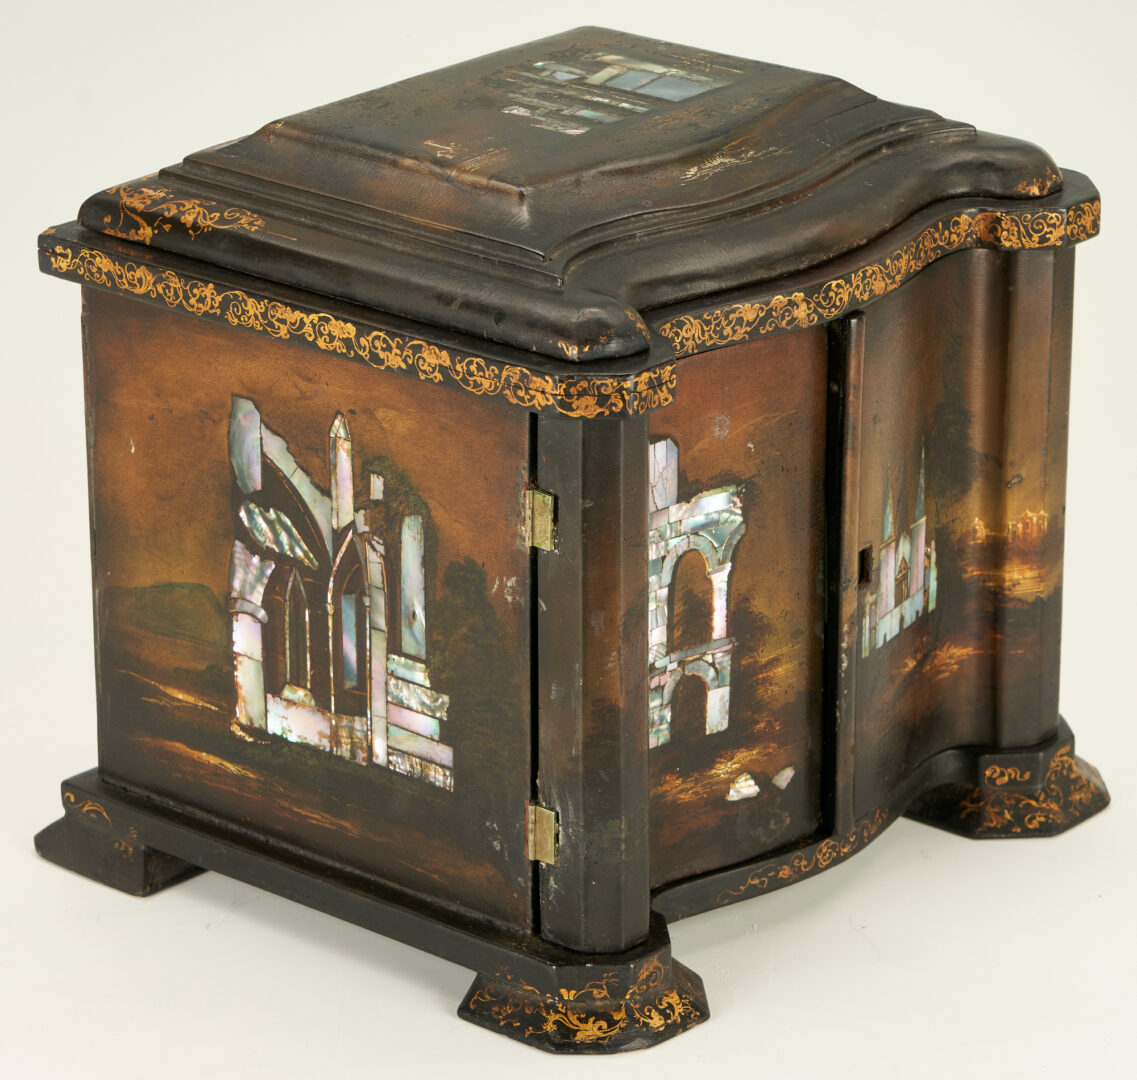 Lot 231: Mother of Pearl Scenic Inlaid Gilt Lacquer Jewelry Box